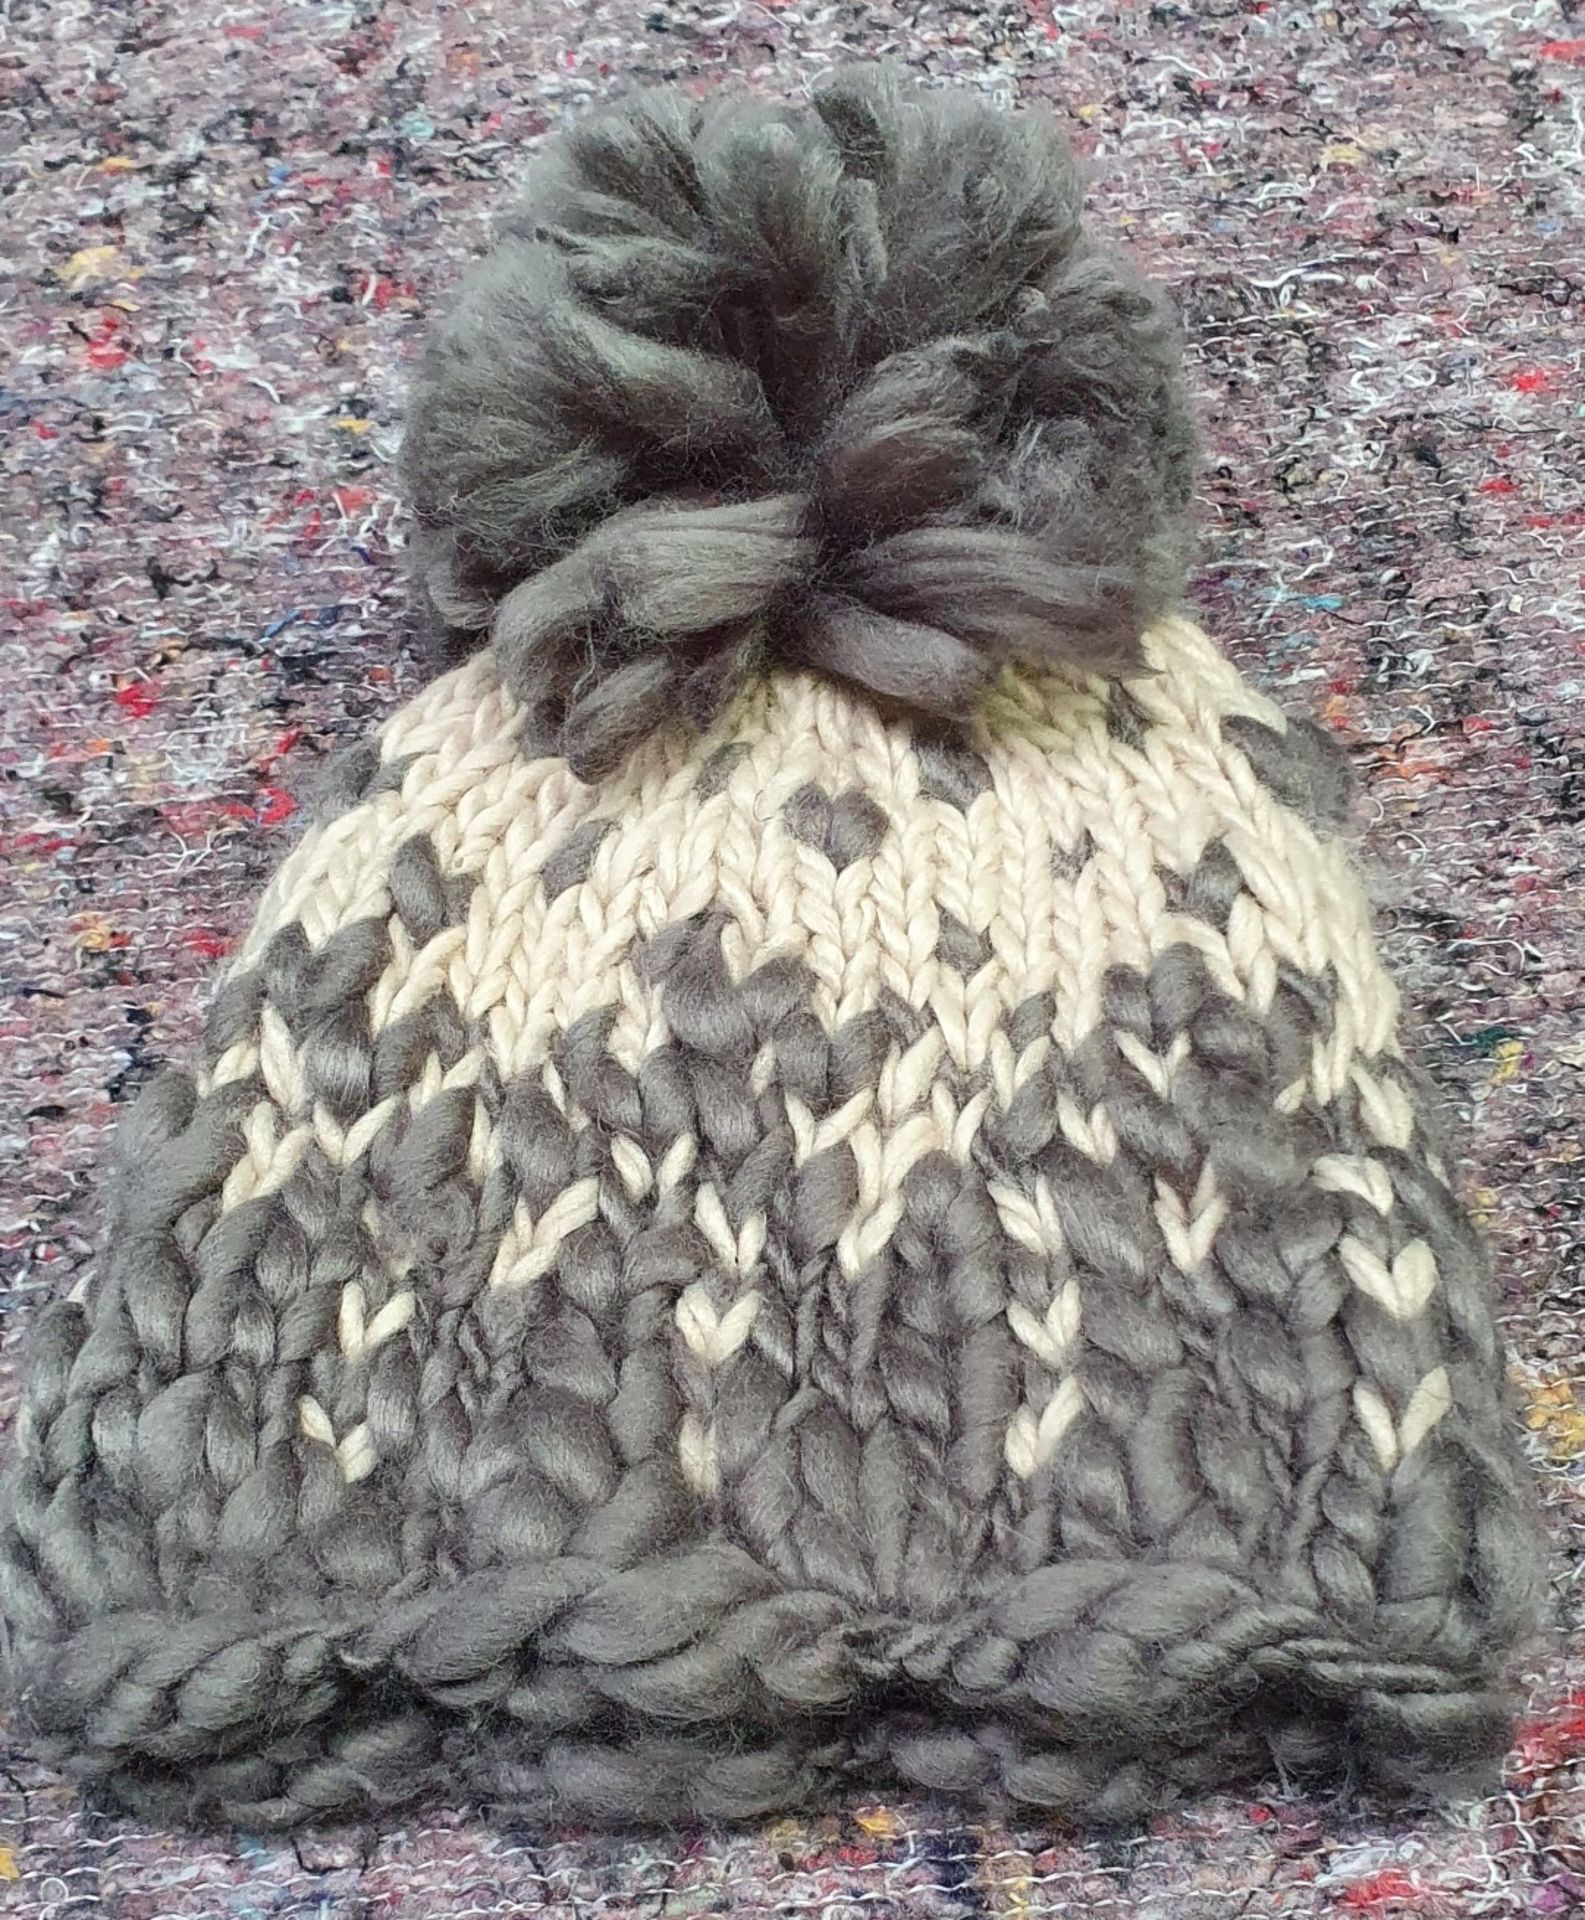 13 x Assorted Bobble Hats and Woolly Gloves by From The Source - New Stock - Ref: TCH236 - CL840 - - Image 6 of 24